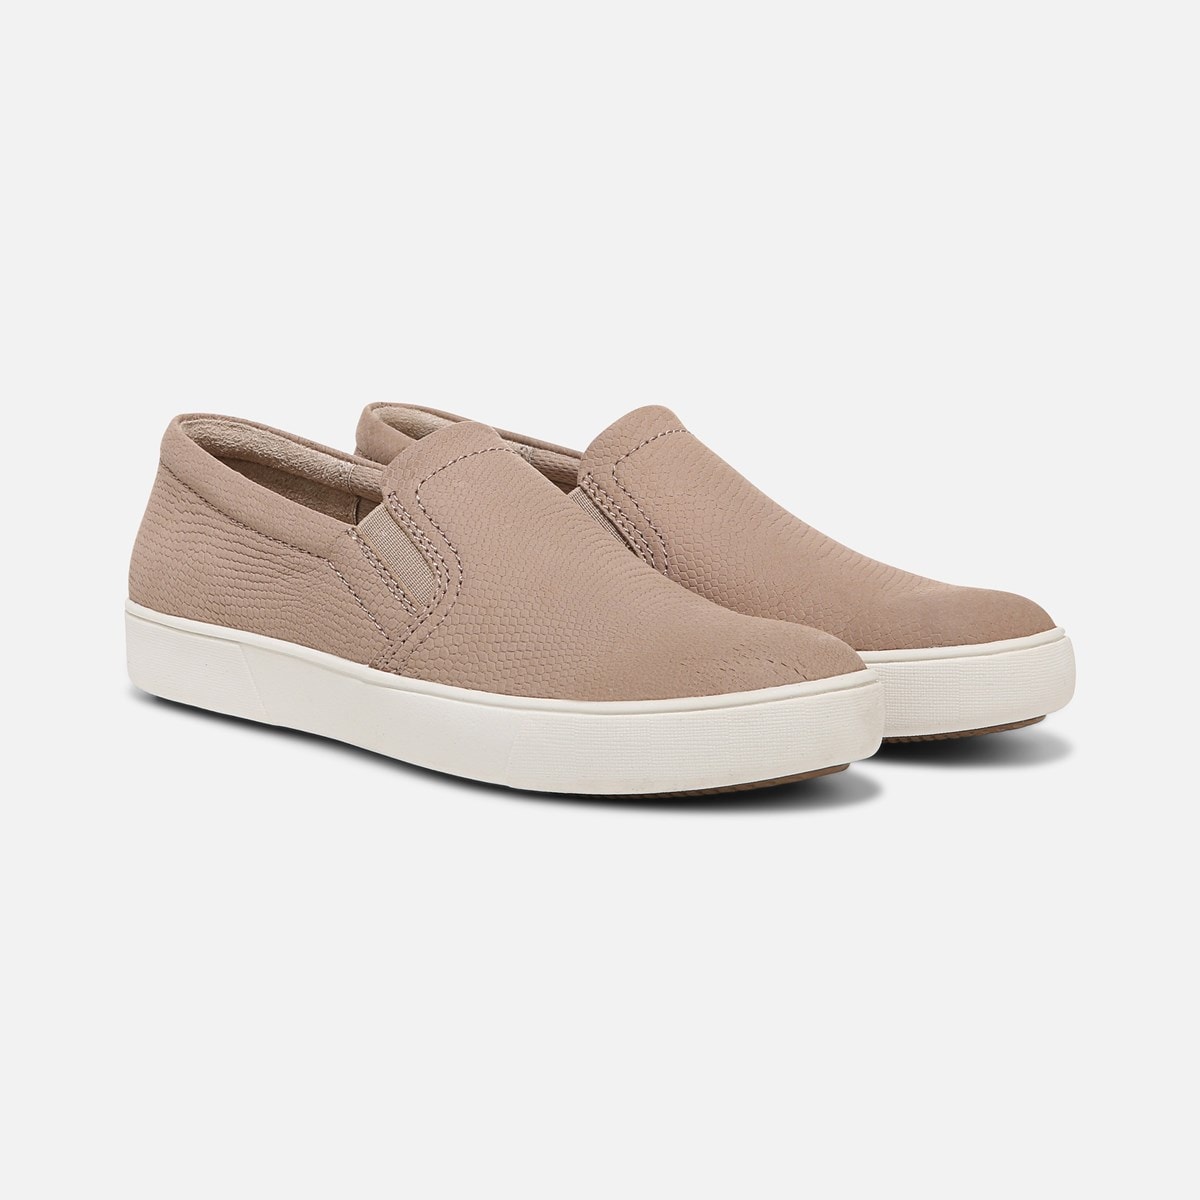 naturalizer marianne sneakers oatmeal